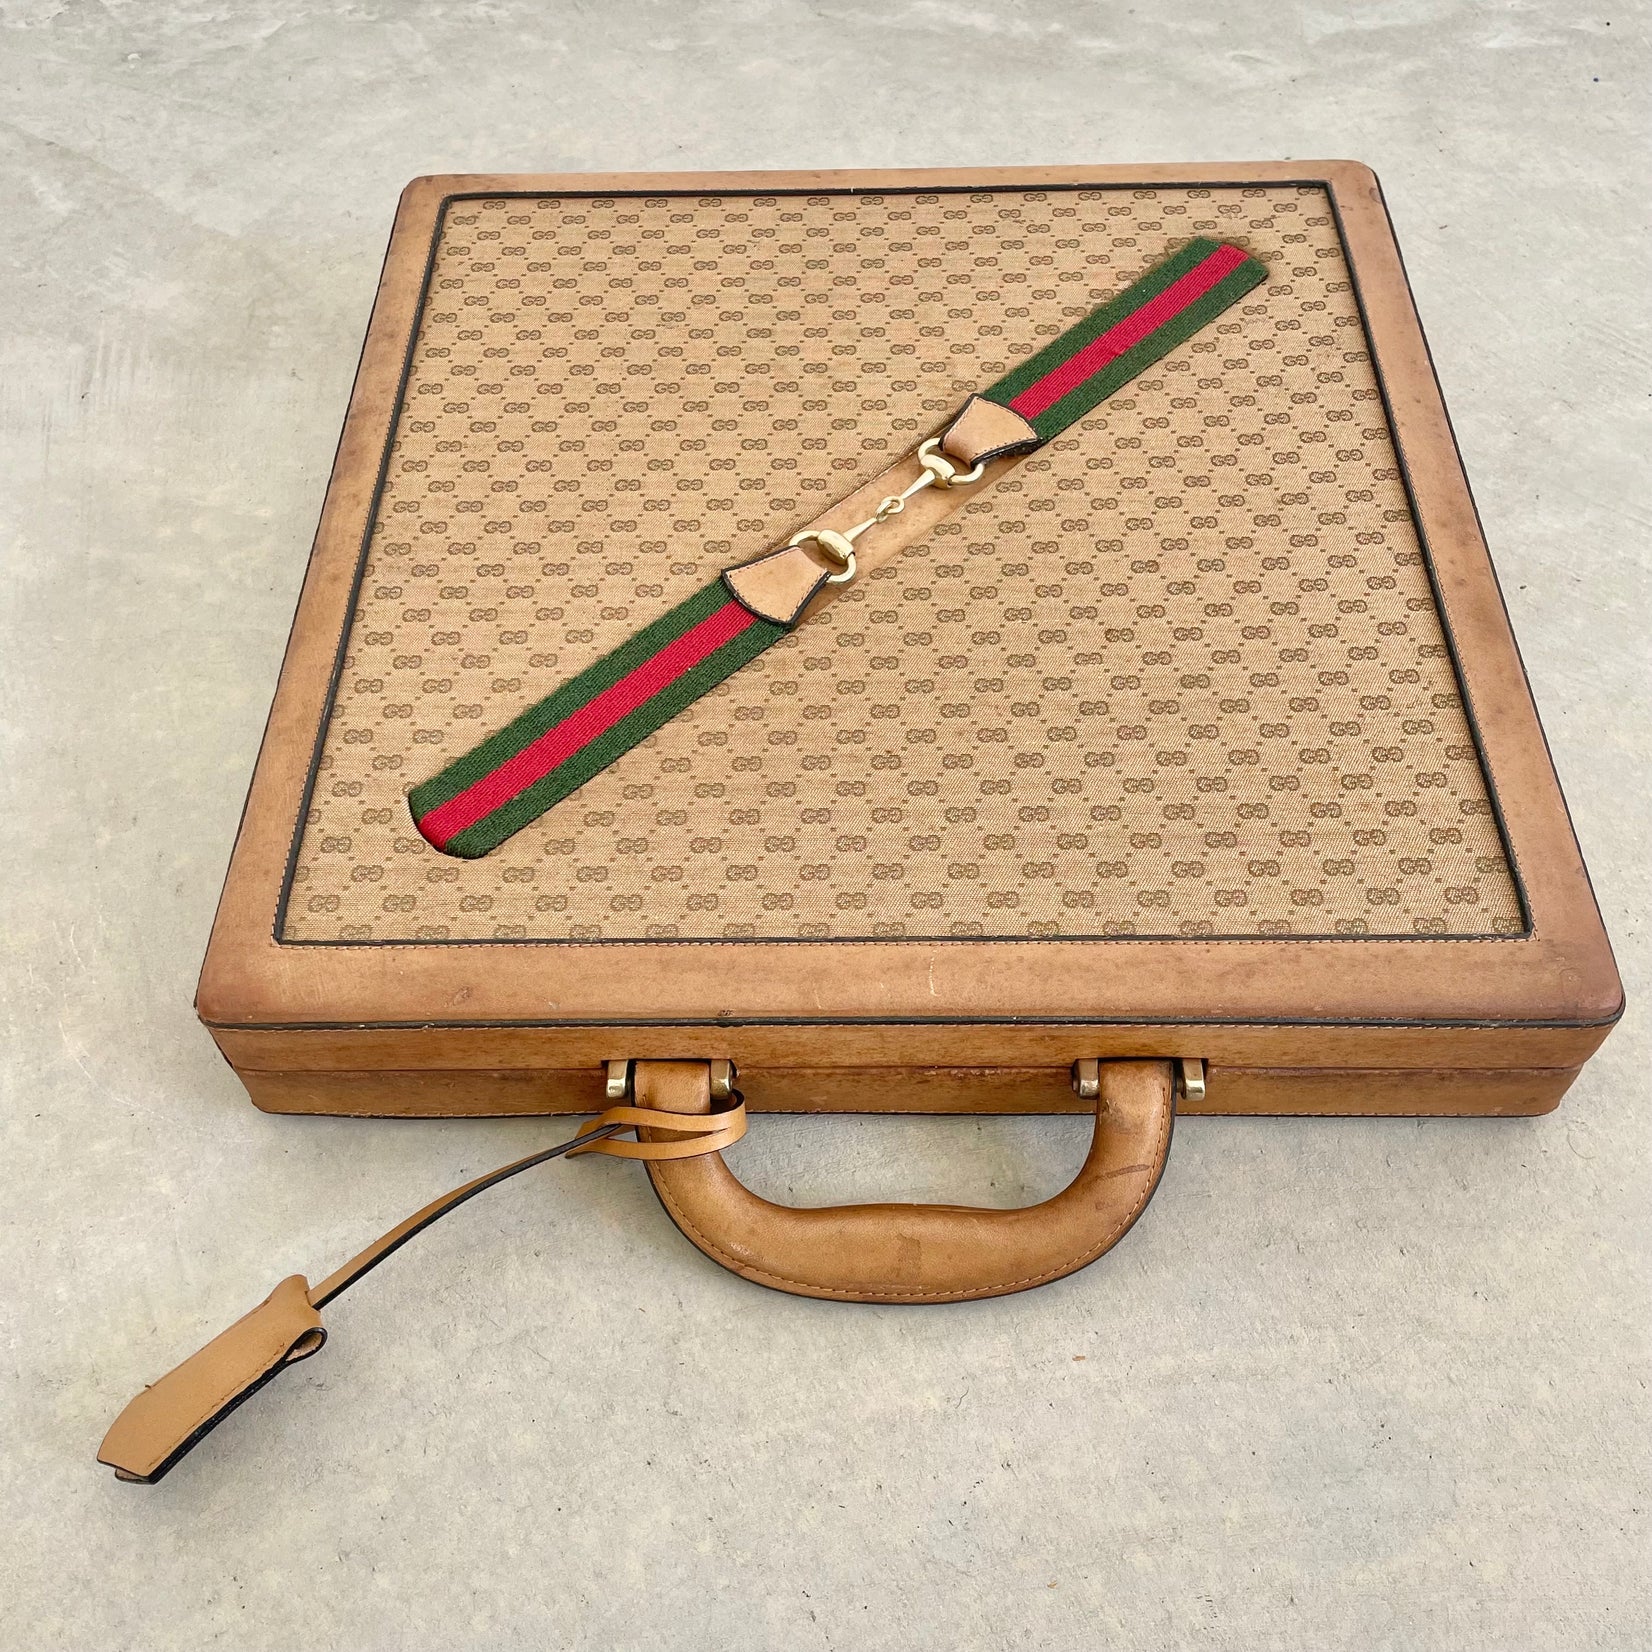 Gucci Leather Travel Multi-Game Set, 1980s Italy